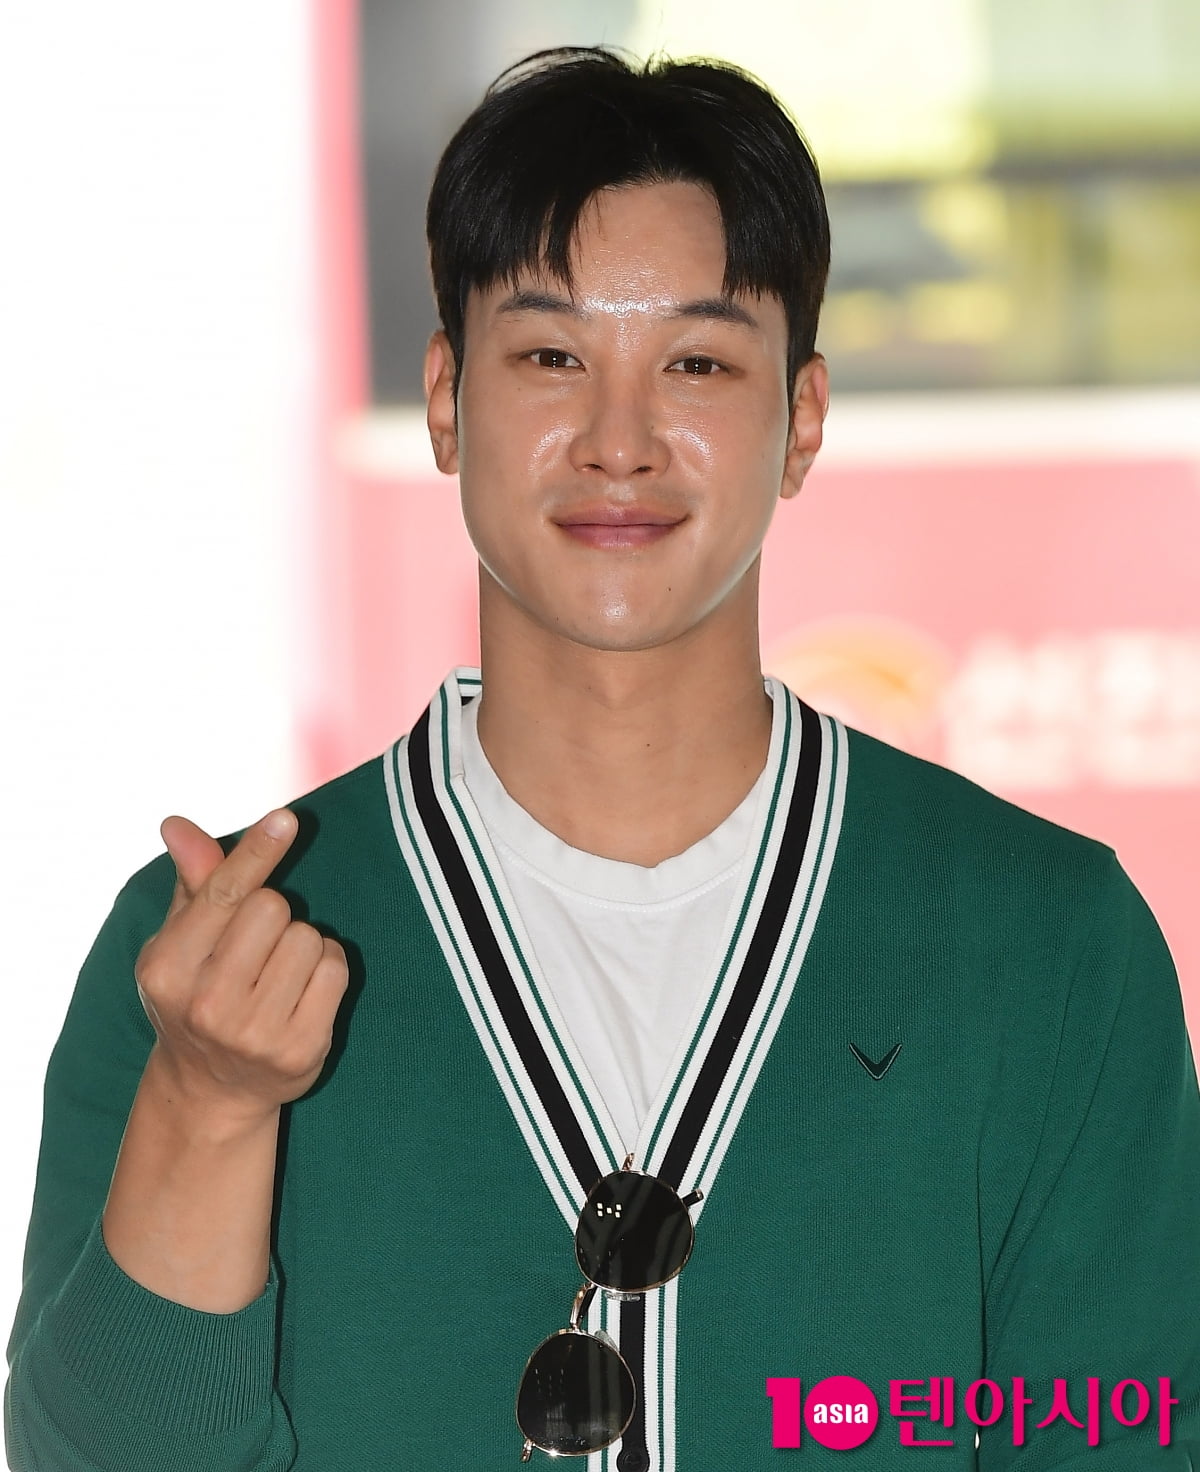 Kim Jin-woo, who lost 17kg, explains why he quit the drama midway through